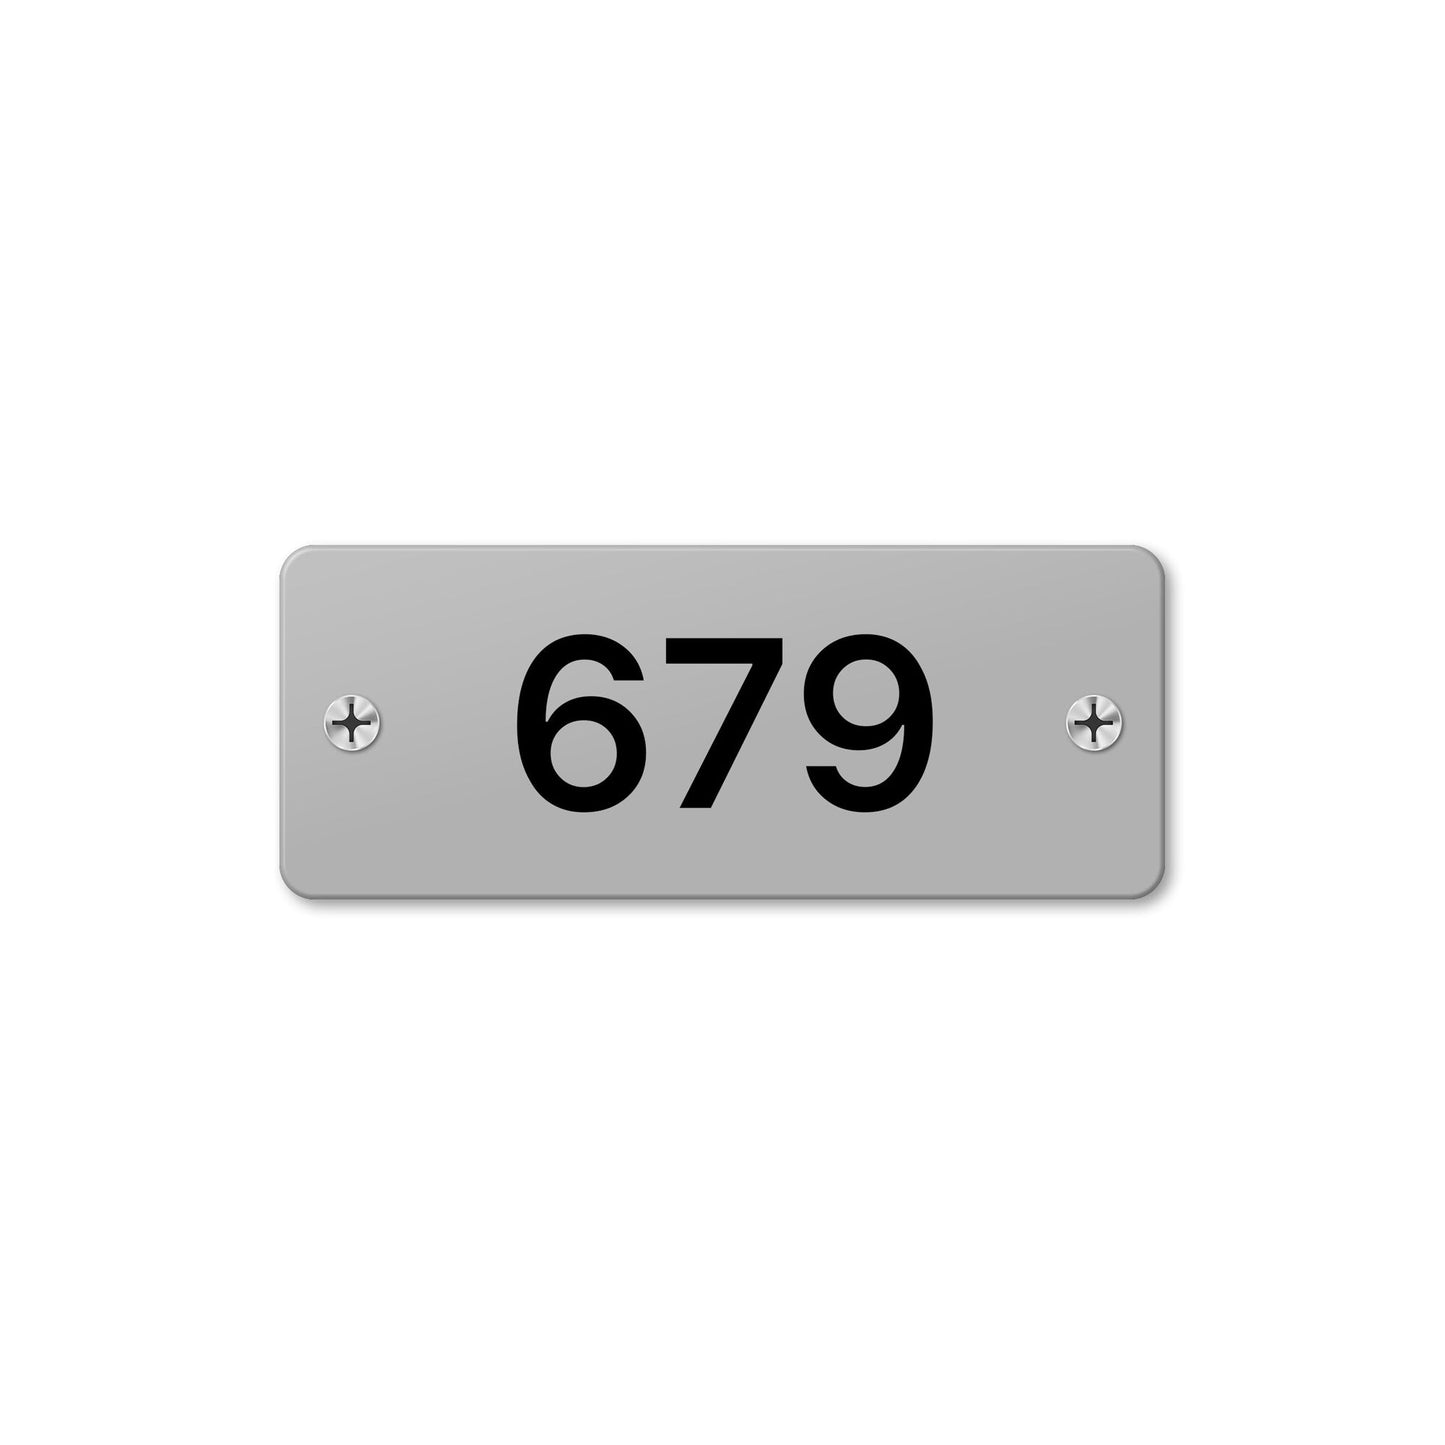 Numeral 679